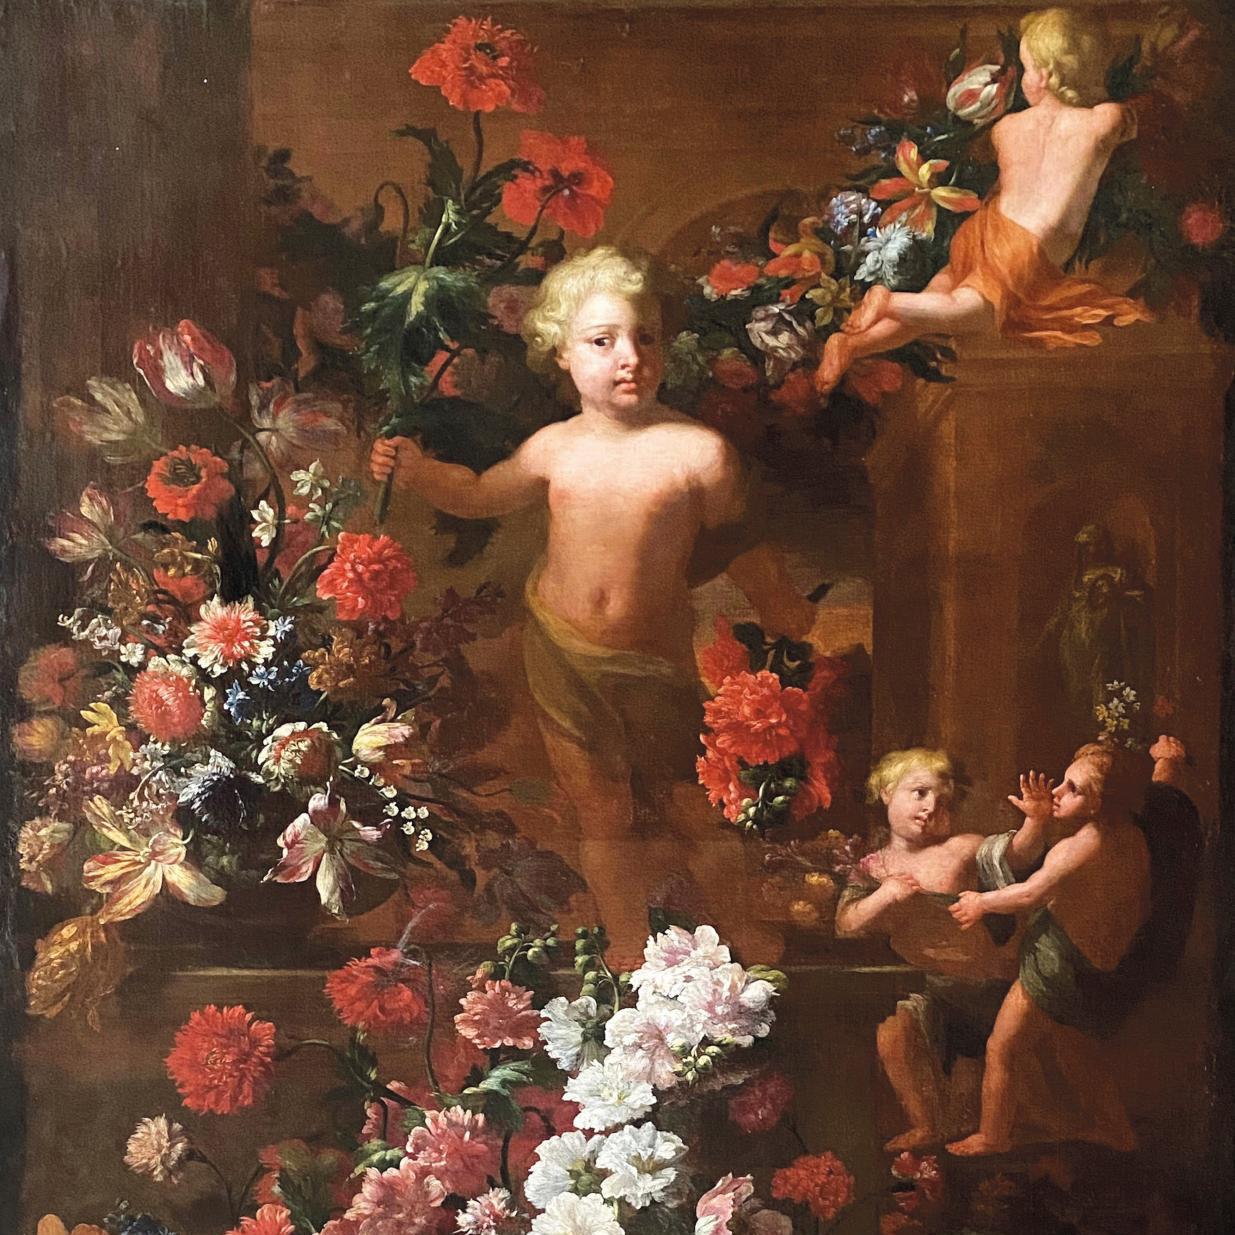 Monnoyer and the Love of Flowers During the Reign of Louis XIV